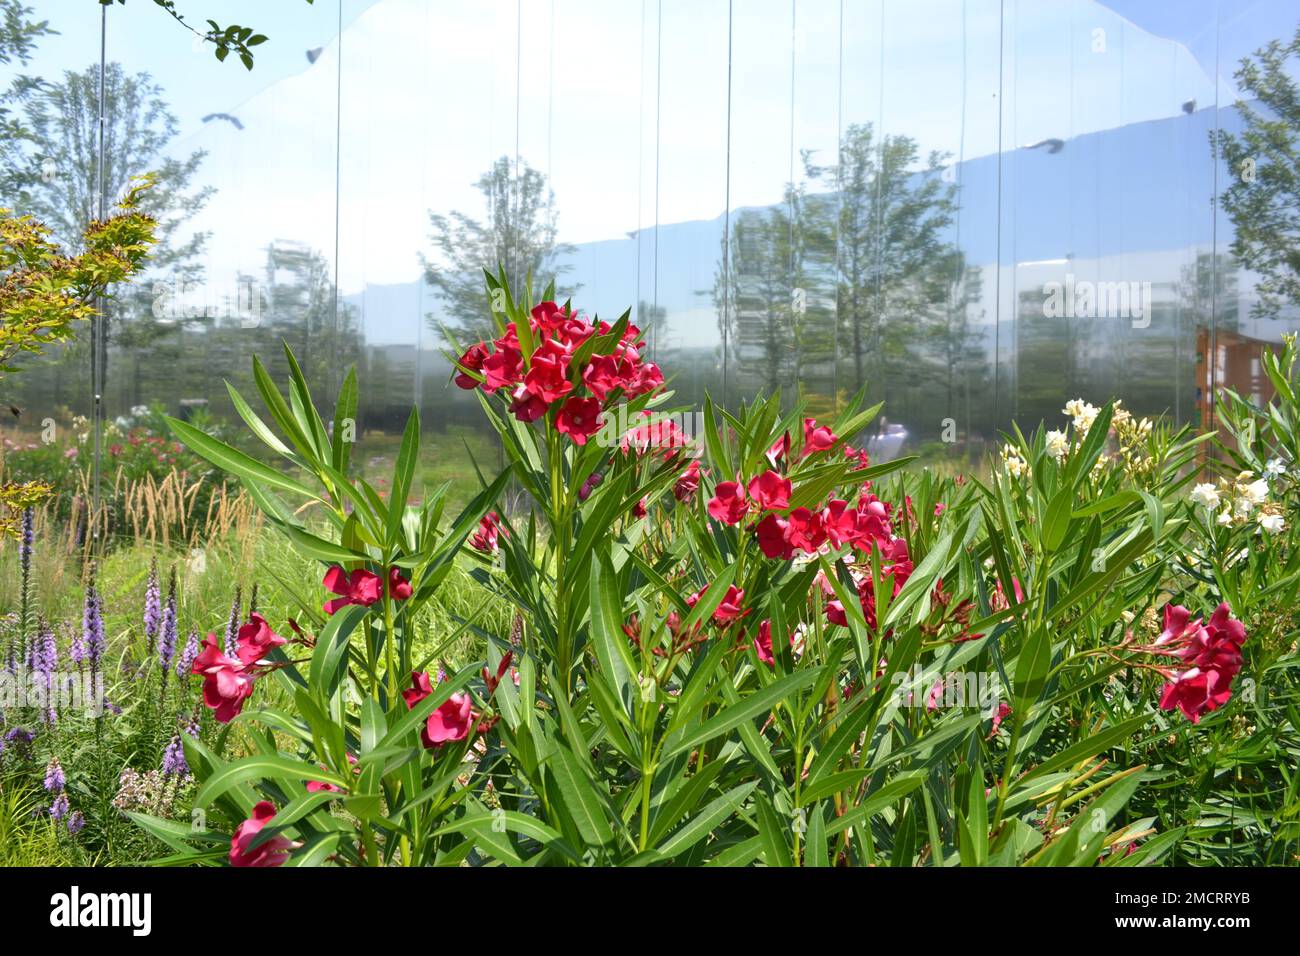 Polish Pavilion Milan Expo 2015. Phododendron leaves with red flowers. Mirrors as tall, giant and large as garden walls extend the vision. Stock Photo